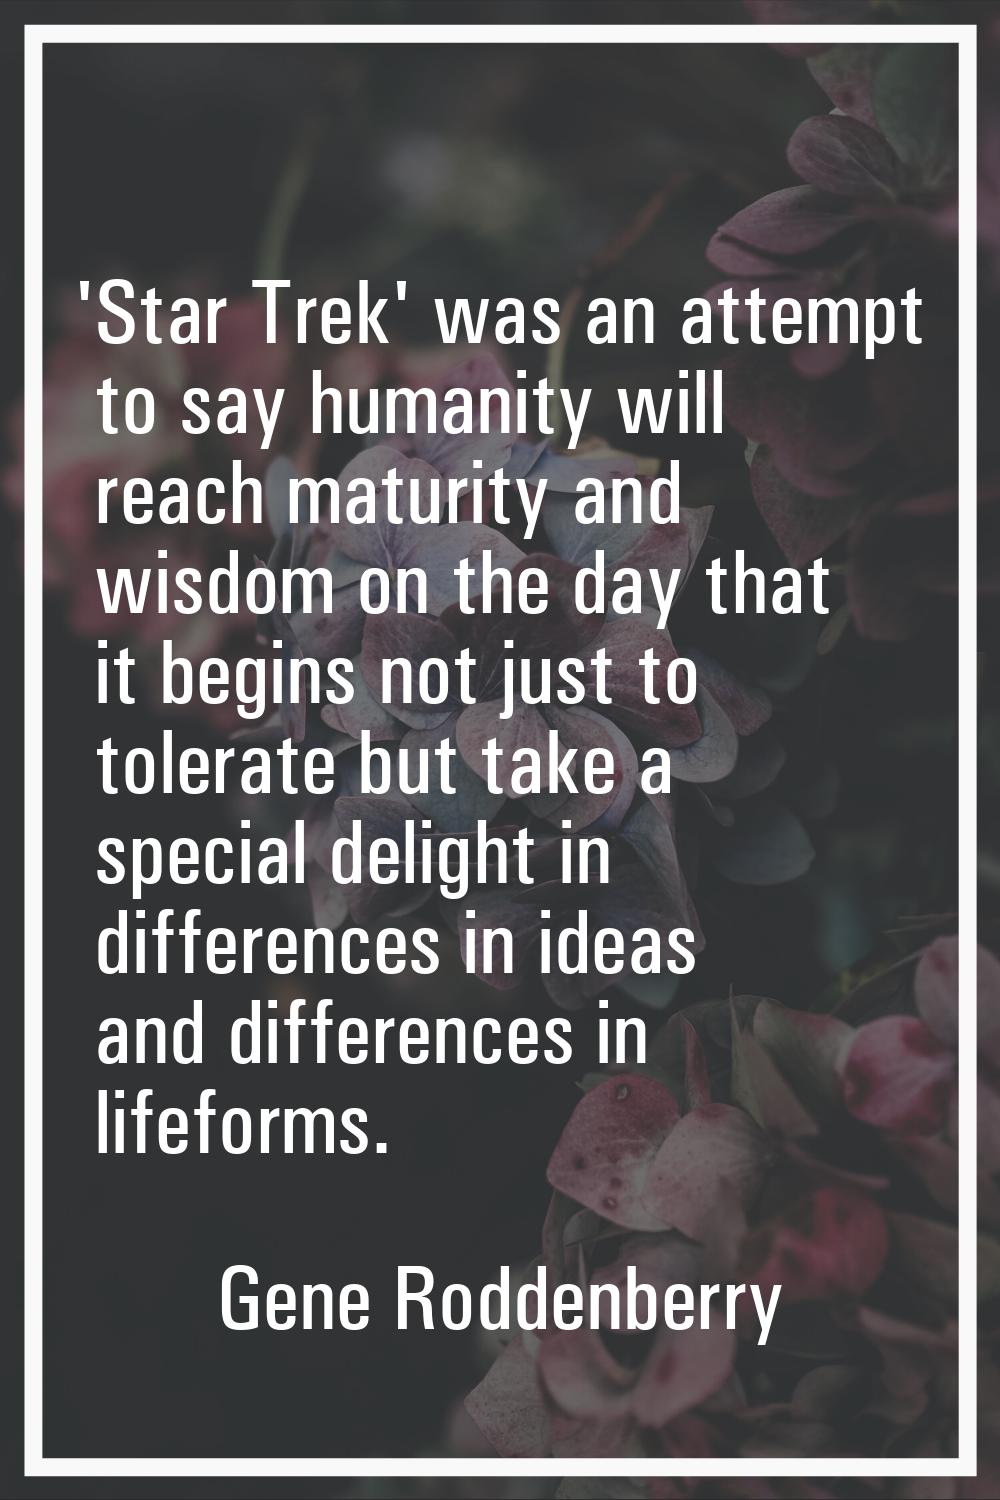 'Star Trek' was an attempt to say humanity will reach maturity and wisdom on the day that it begins